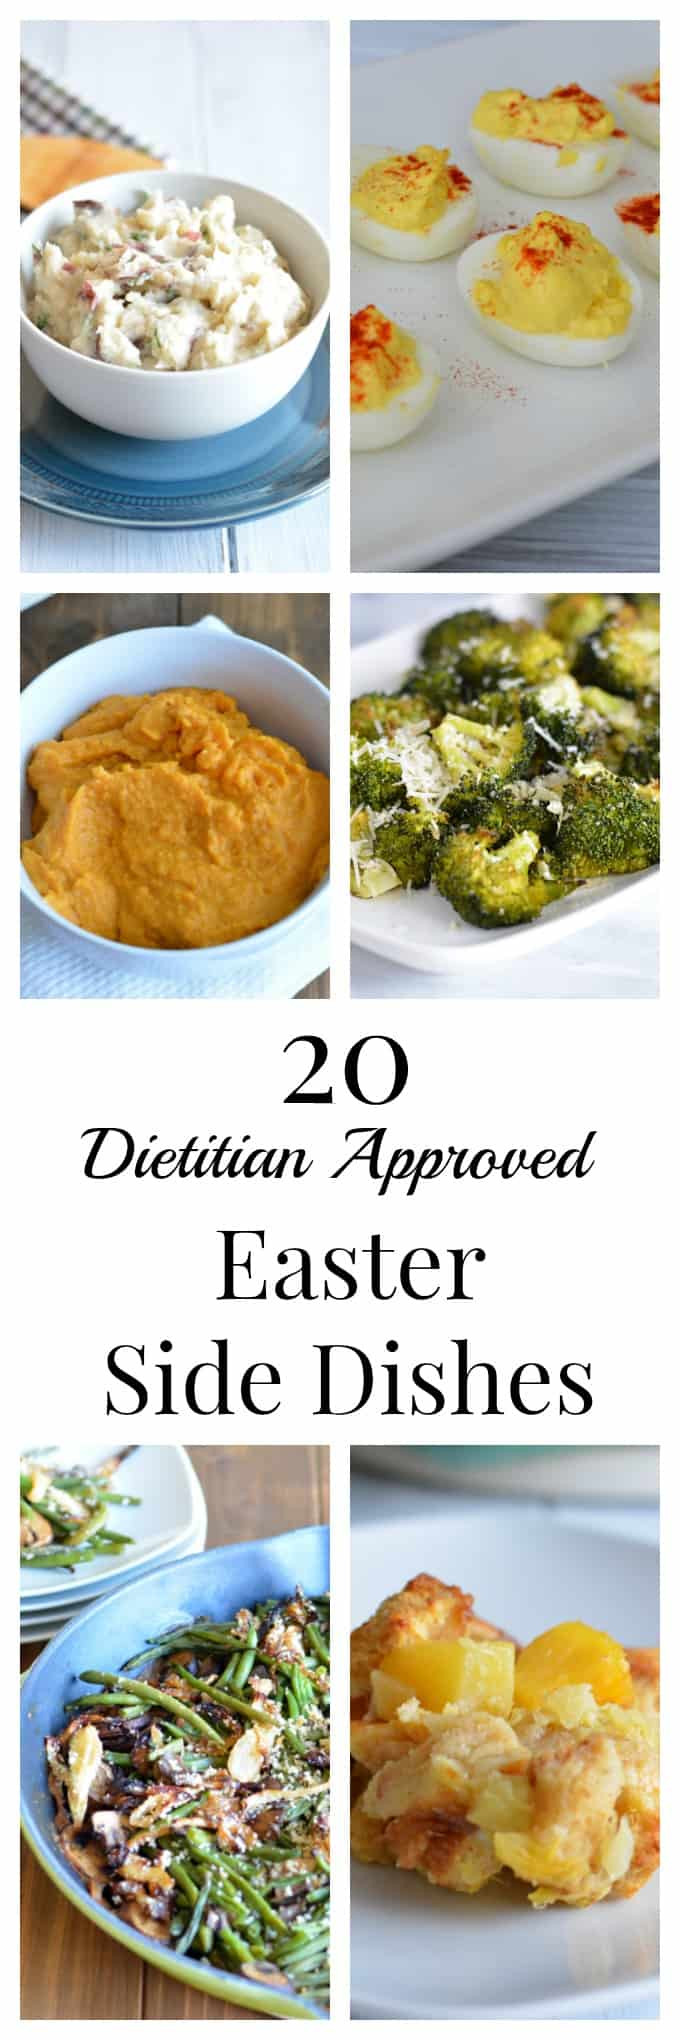 Best Easter Side Dishes
 20 Dietitian Approved Easter Side Dishes Nourished Simply